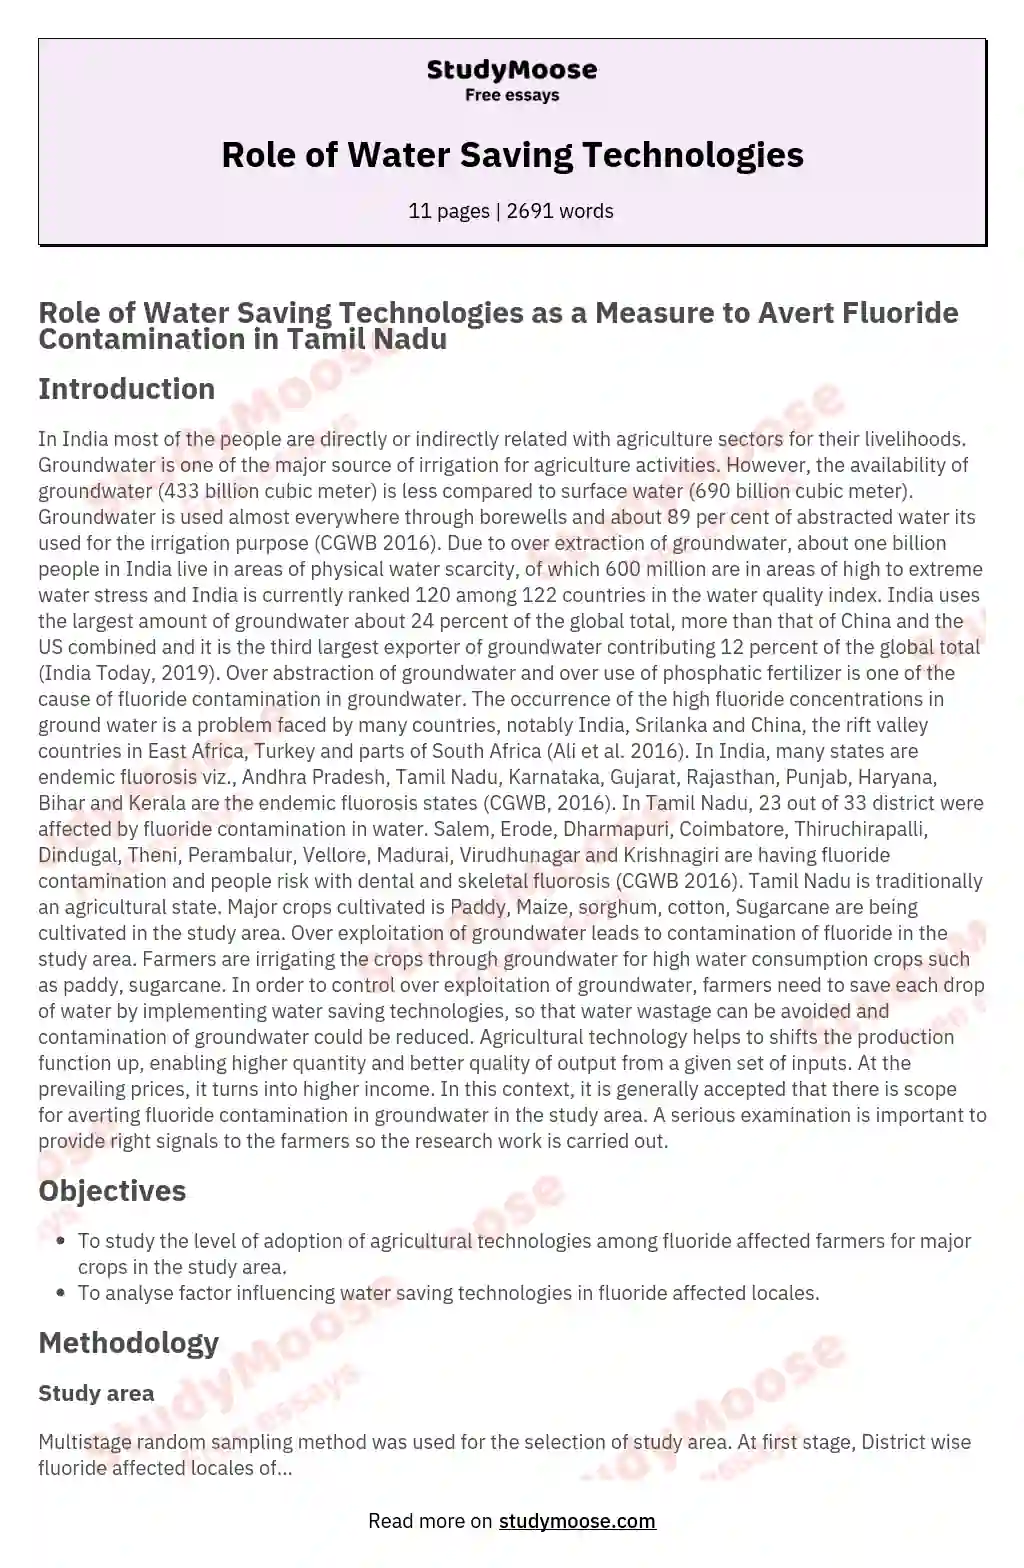 Role of Water Saving Technologies